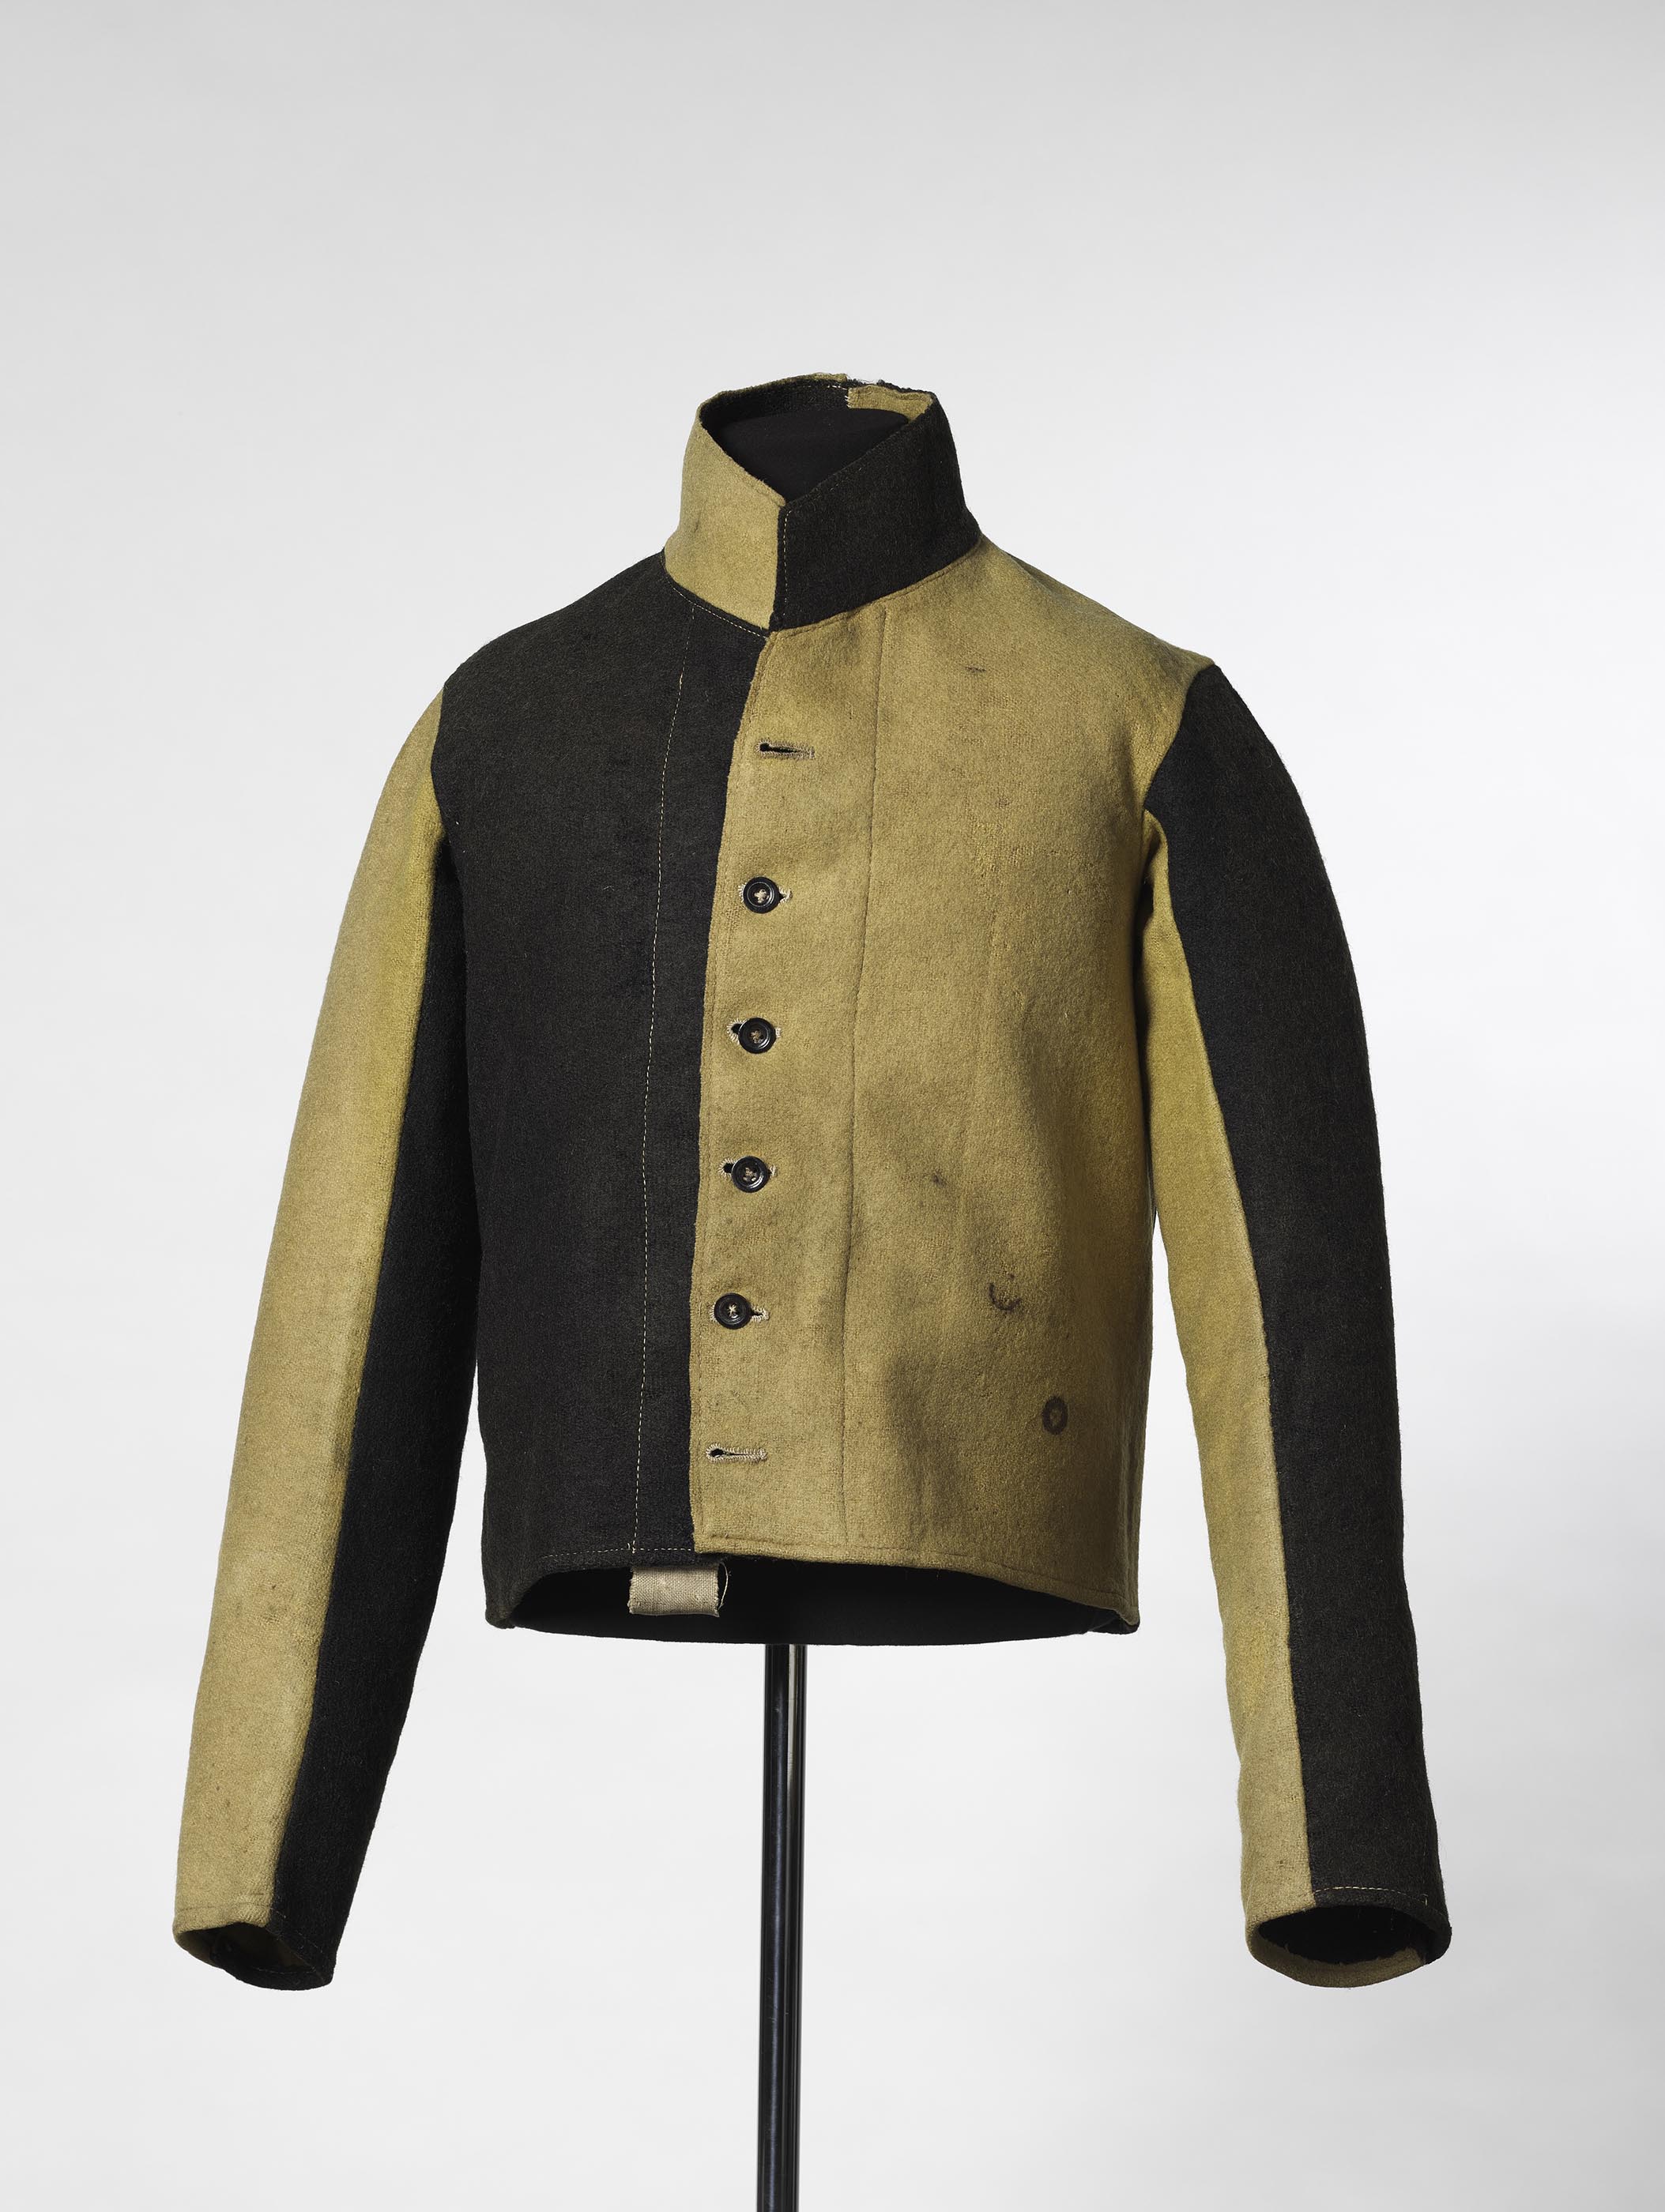 Convict's black and yellow woollen work jacket, from Campbell Street Goal, Hobart, late 1850s.